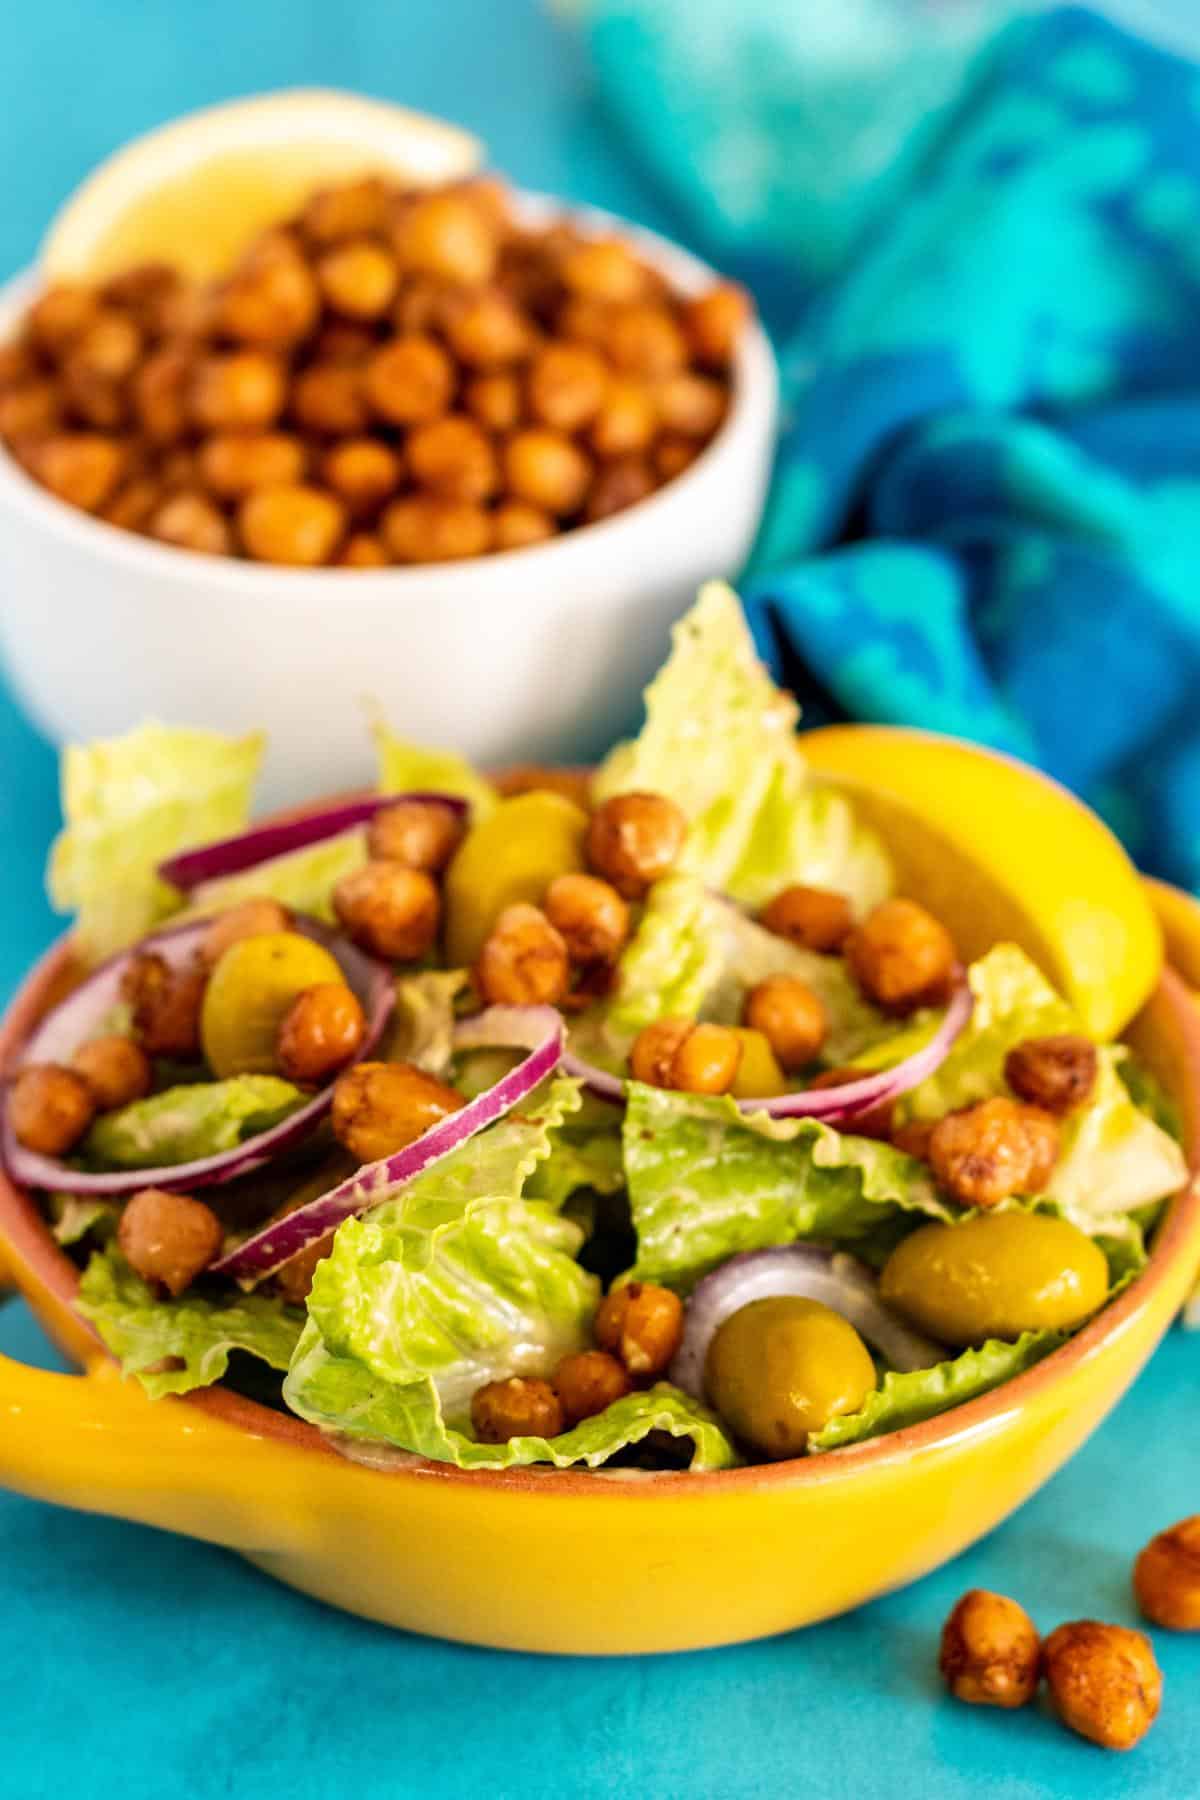 Salads with lettuce, green olives, red onion, and chickpeas with bowl of pan fried chickpeas in the background.